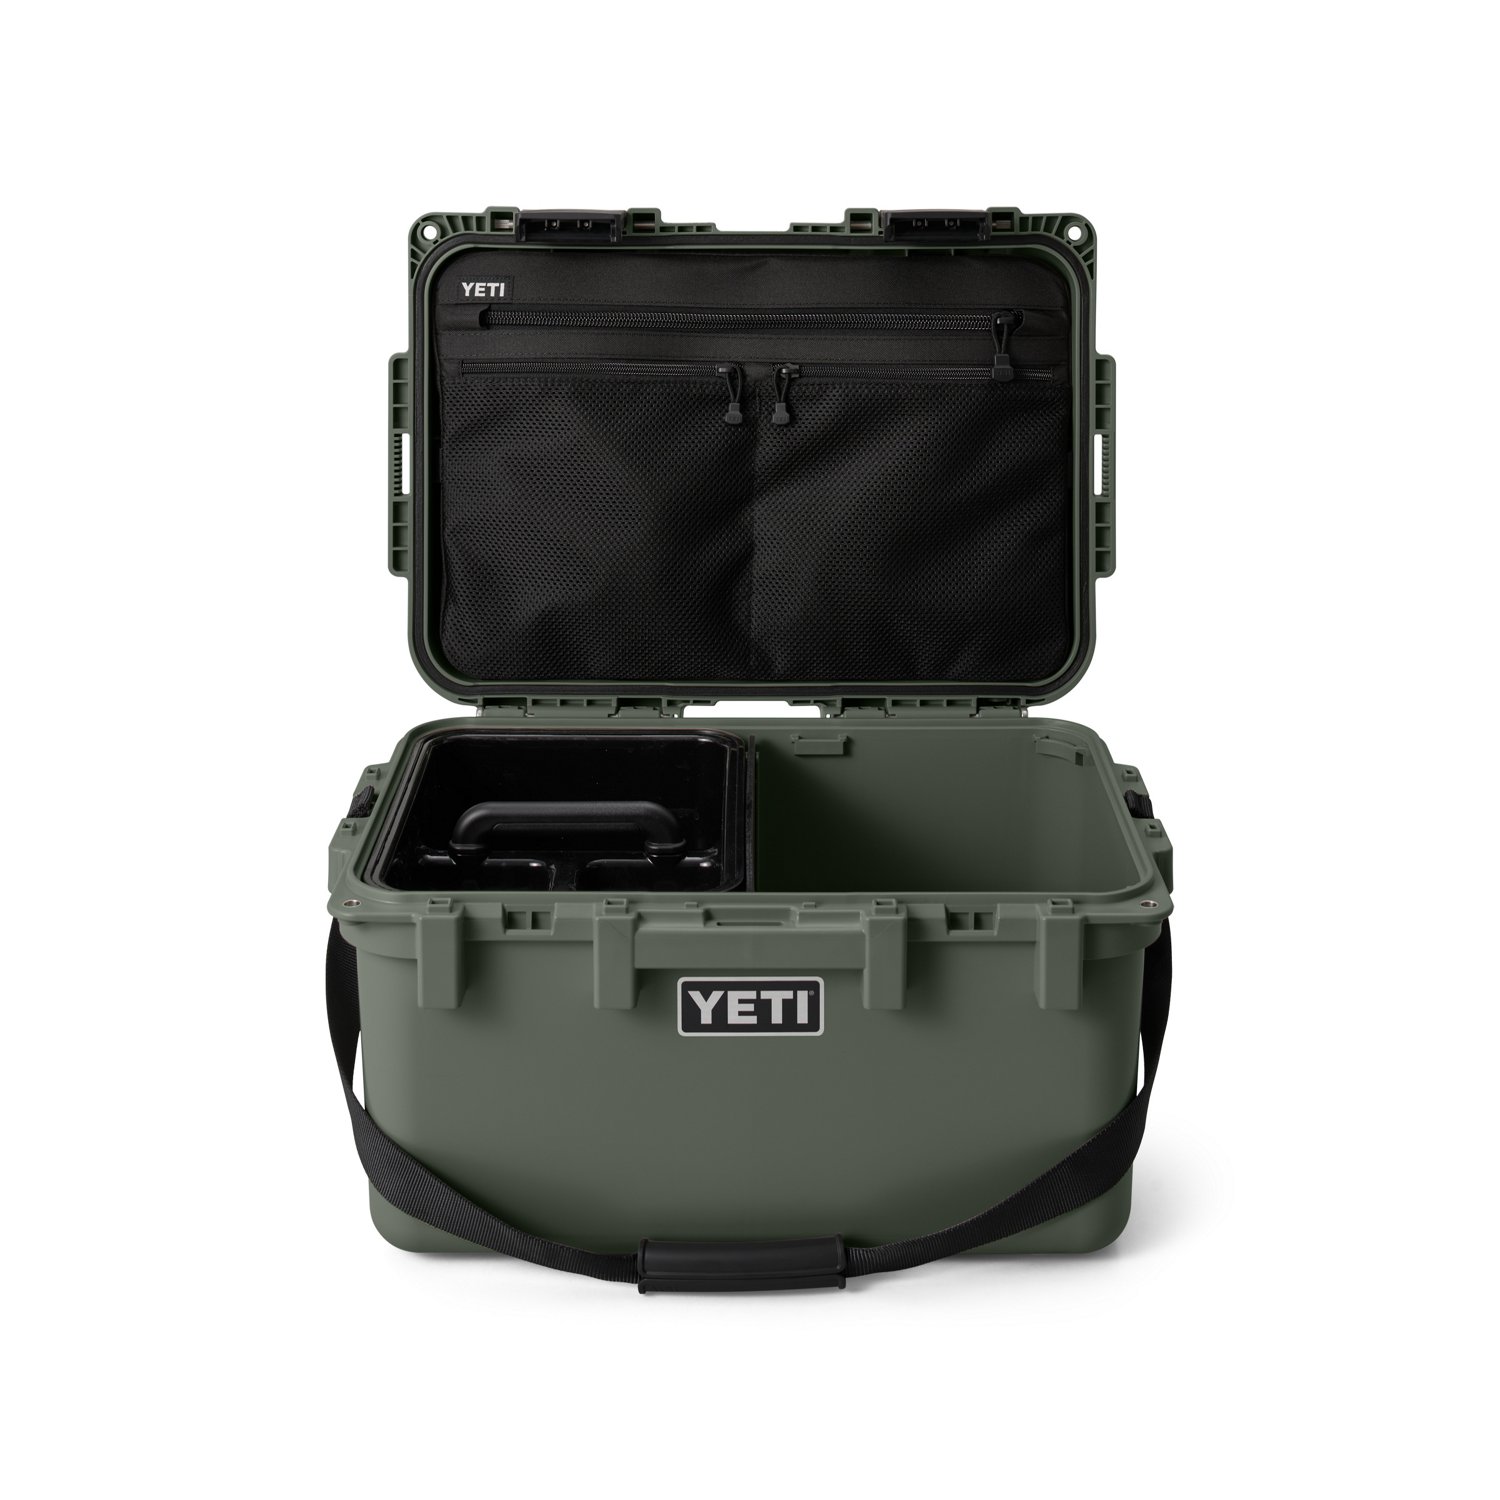 https://academy.scene7.com/is/image/academy//camping-essentials/yeti-loadout-gobox-30-gear-case-18060131251-green/c2e28594573f48beac21a87c9f6467bc